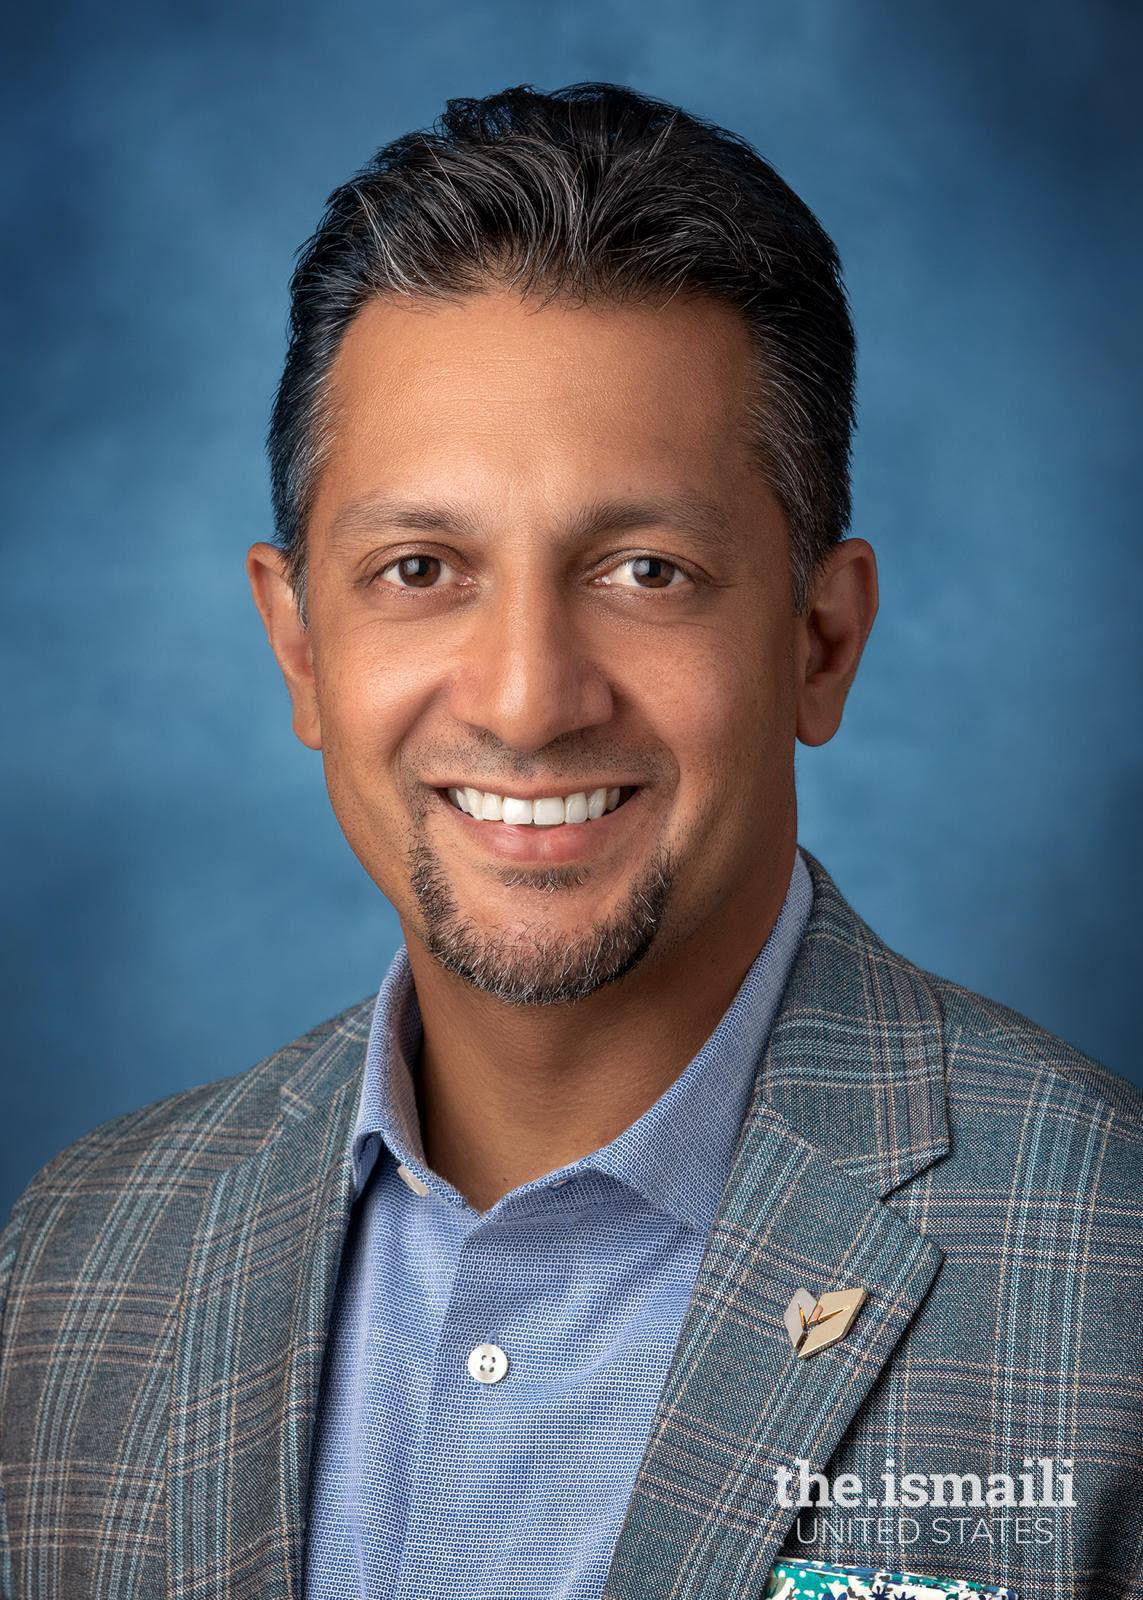 Dr. Nilesh Vora, Medical Director of the MemorialCare Todd Cancer Institute at Long Beach Medical Center, CA.